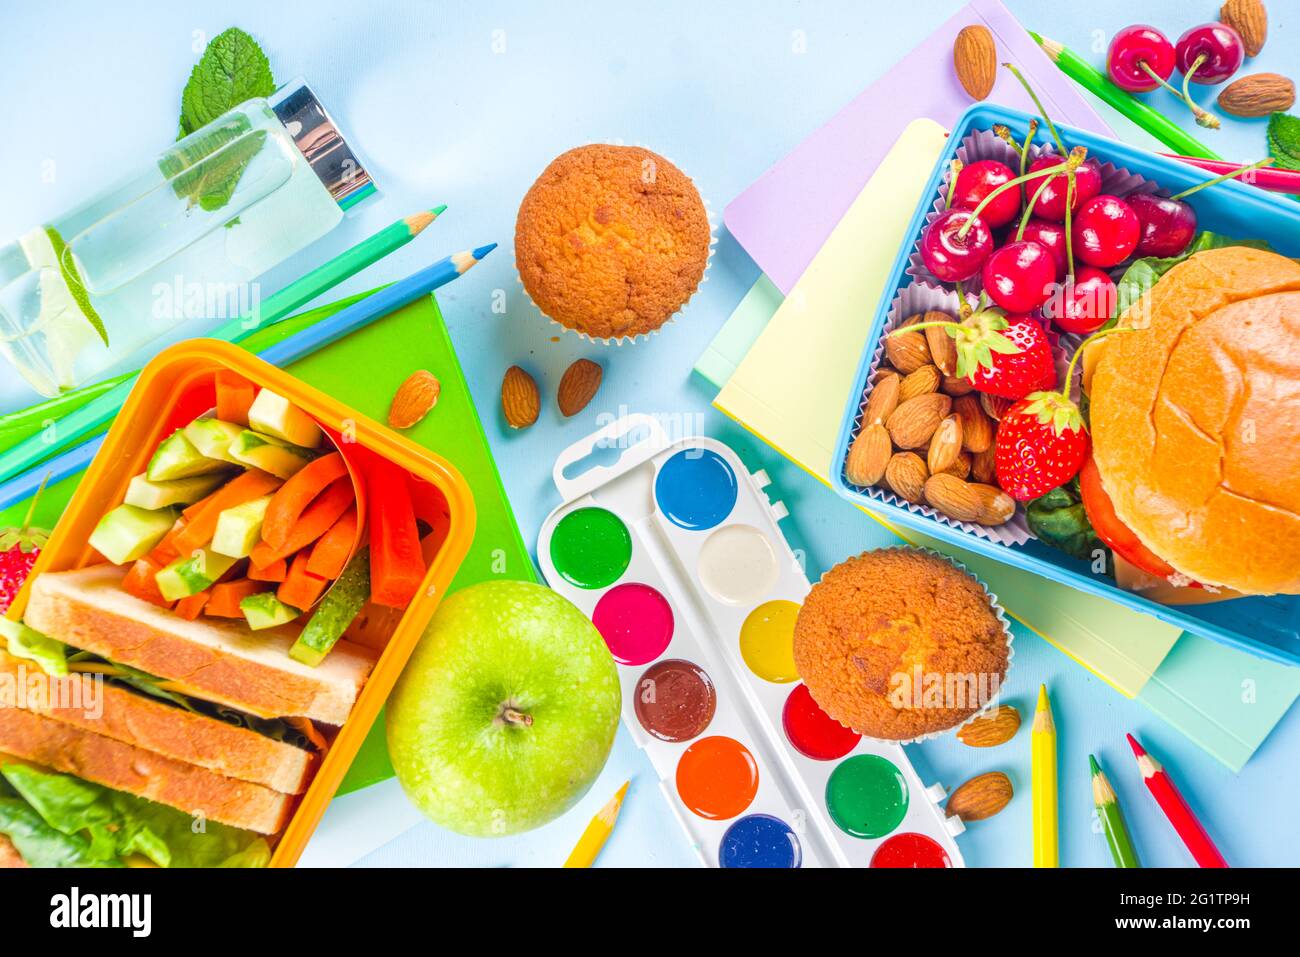 https://c8.alamy.com/comp/2G1TP9H/back-to-school-healthy-tasty-kid-lunch-box-with-sandwiches-nuts-fresh-fruits-and-vegetable-sticks-with-school-supplies-pencils-notebooks-on-bri-2G1TP9H.jpg